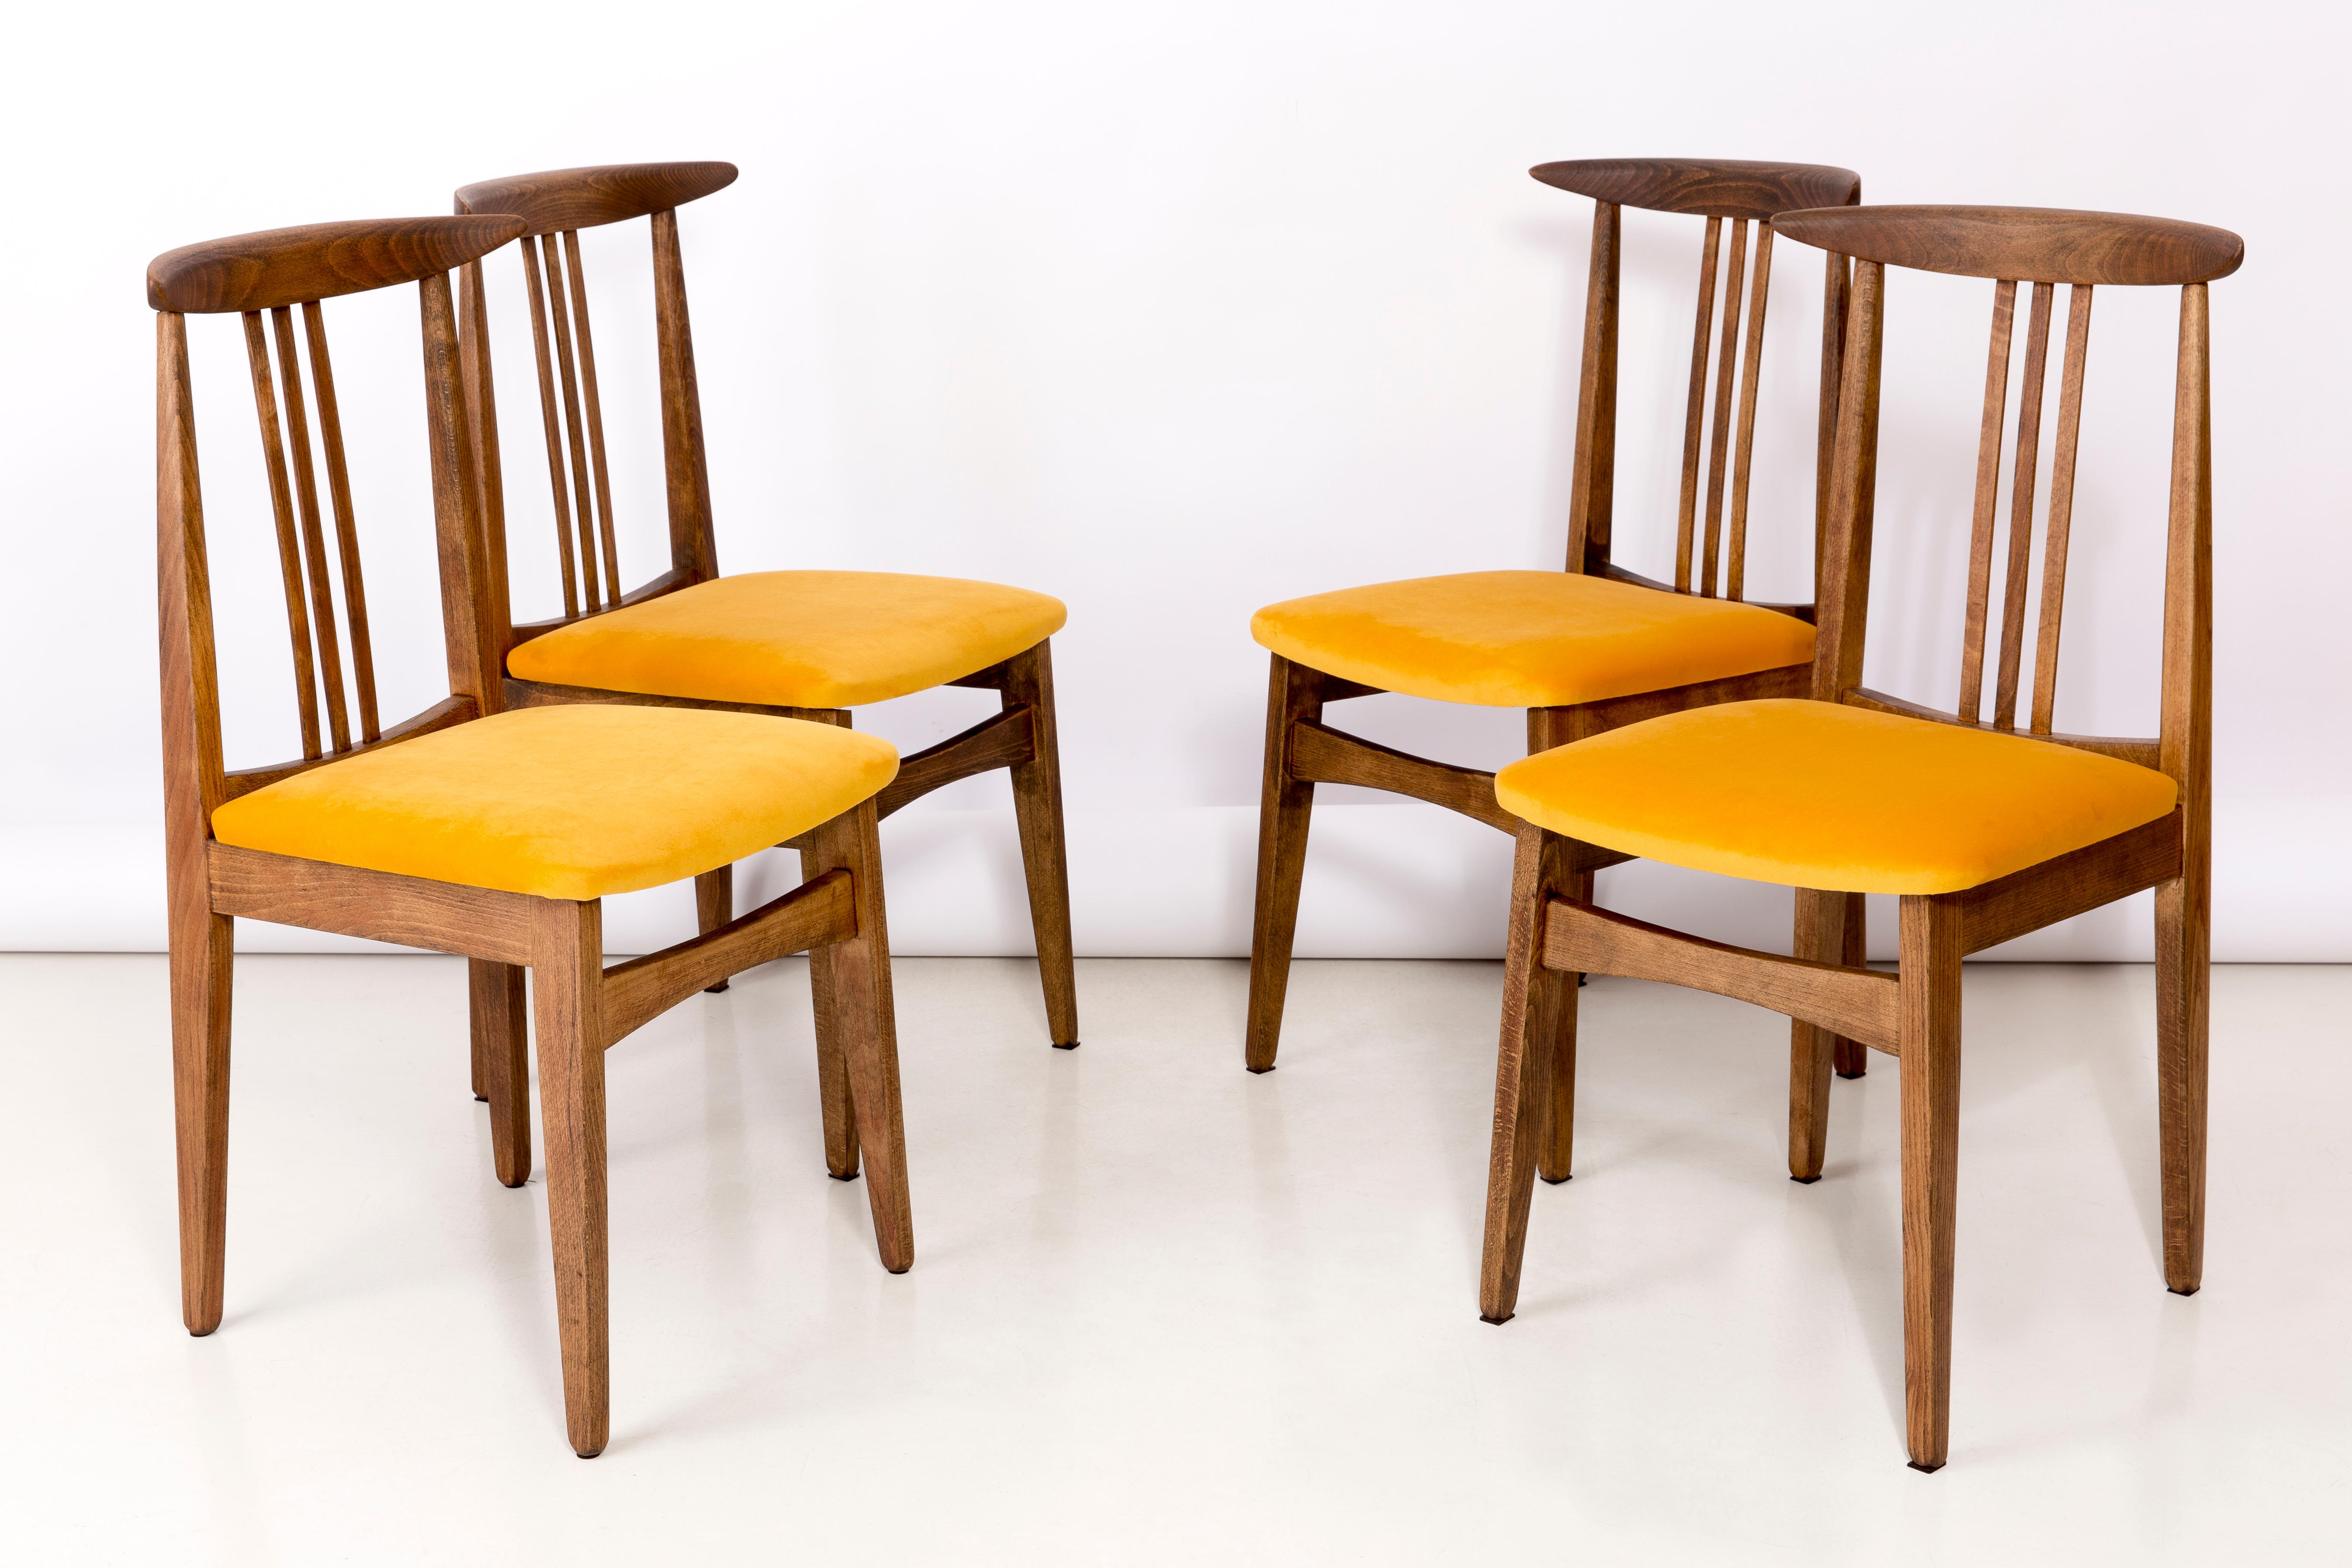 Set of four beech chairs designed by M. Zielinski, type 200 / 100B. Manufactured by the Opole Furniture Industry Center at the end of the 1960s in Poland. The chairs have undergone a complete carpentry and upholstery renovation. Seats covered with